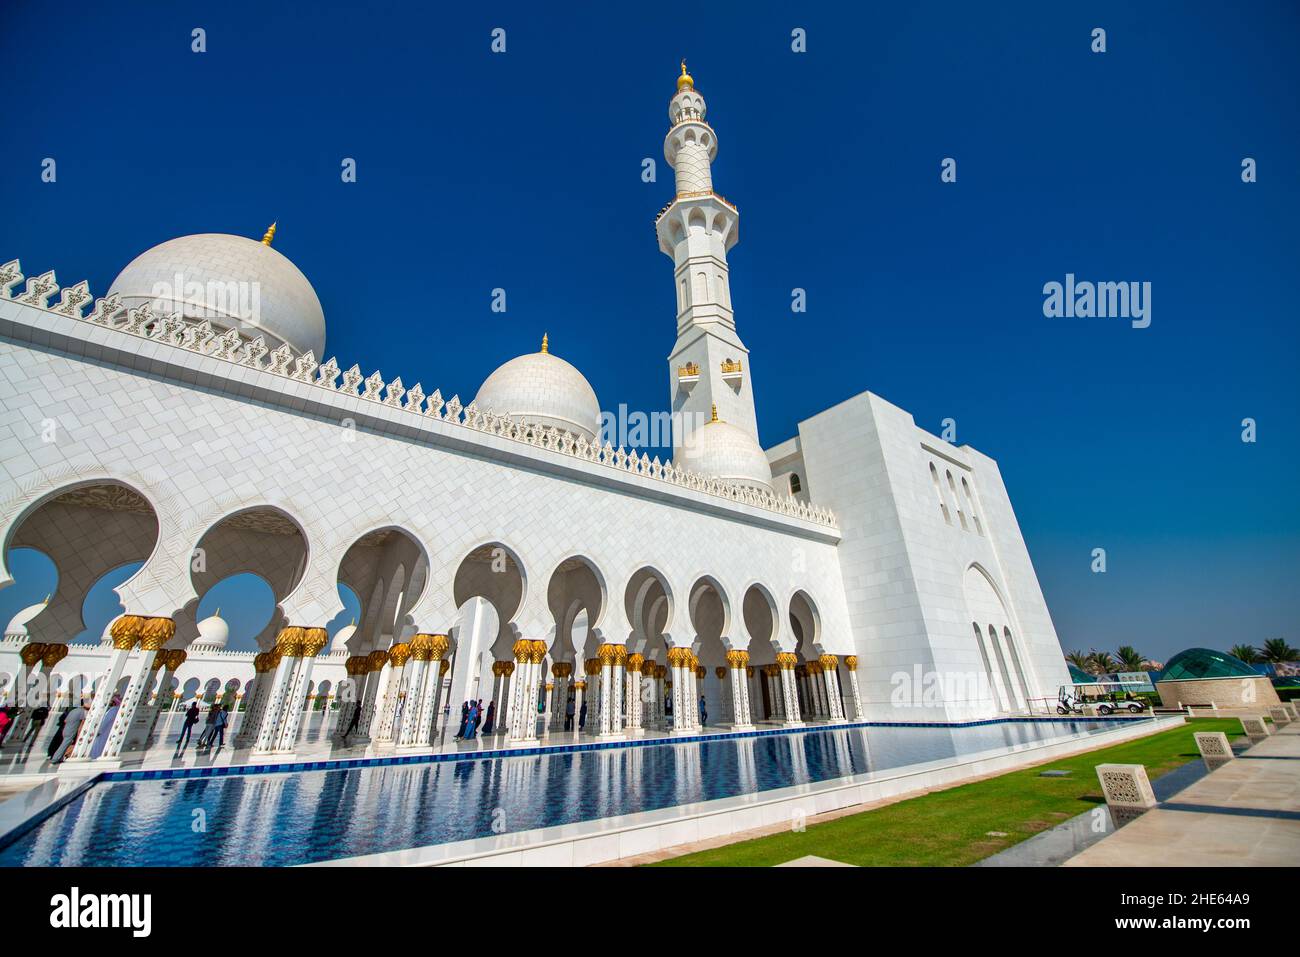 ABU DHABI, UAE - DECEMBER 7, 2016: Islamic and Catholic tourists visit Sheikh Zayed Mosque.It is a major city attraction Stock Photo